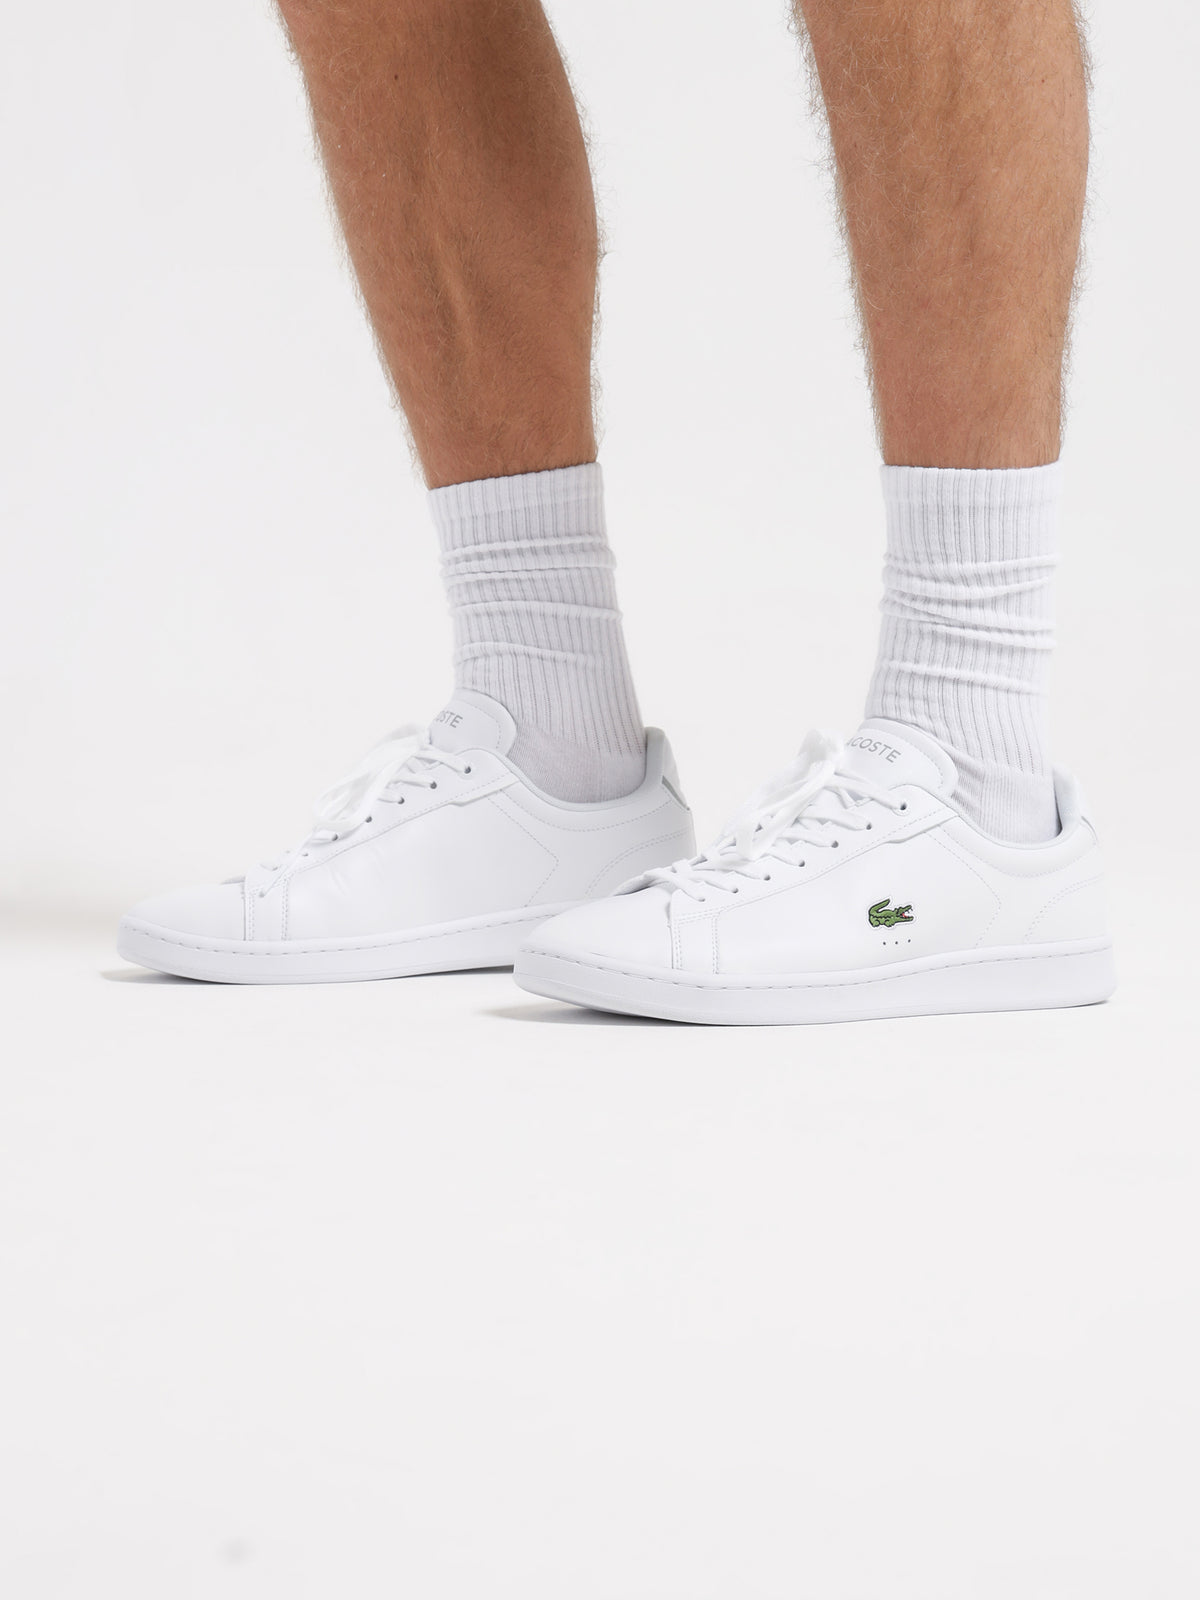 Mens Carnaby Pro BL23 Sneakers in White